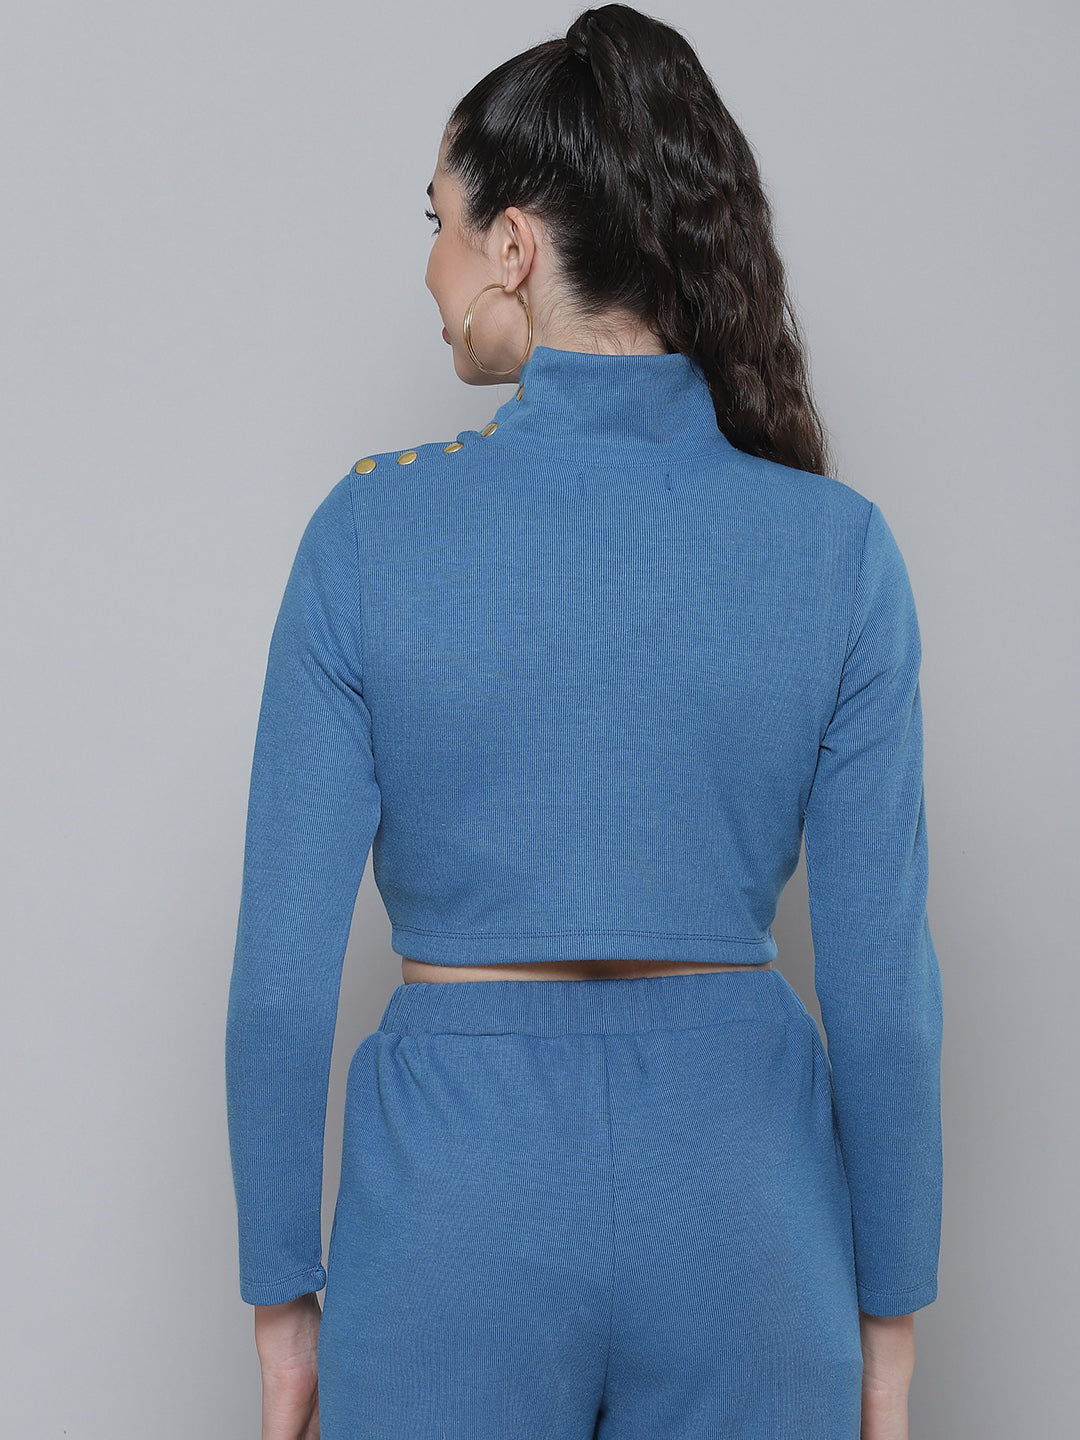 Blue Rib Turtle Buttoned Neck Crop Top